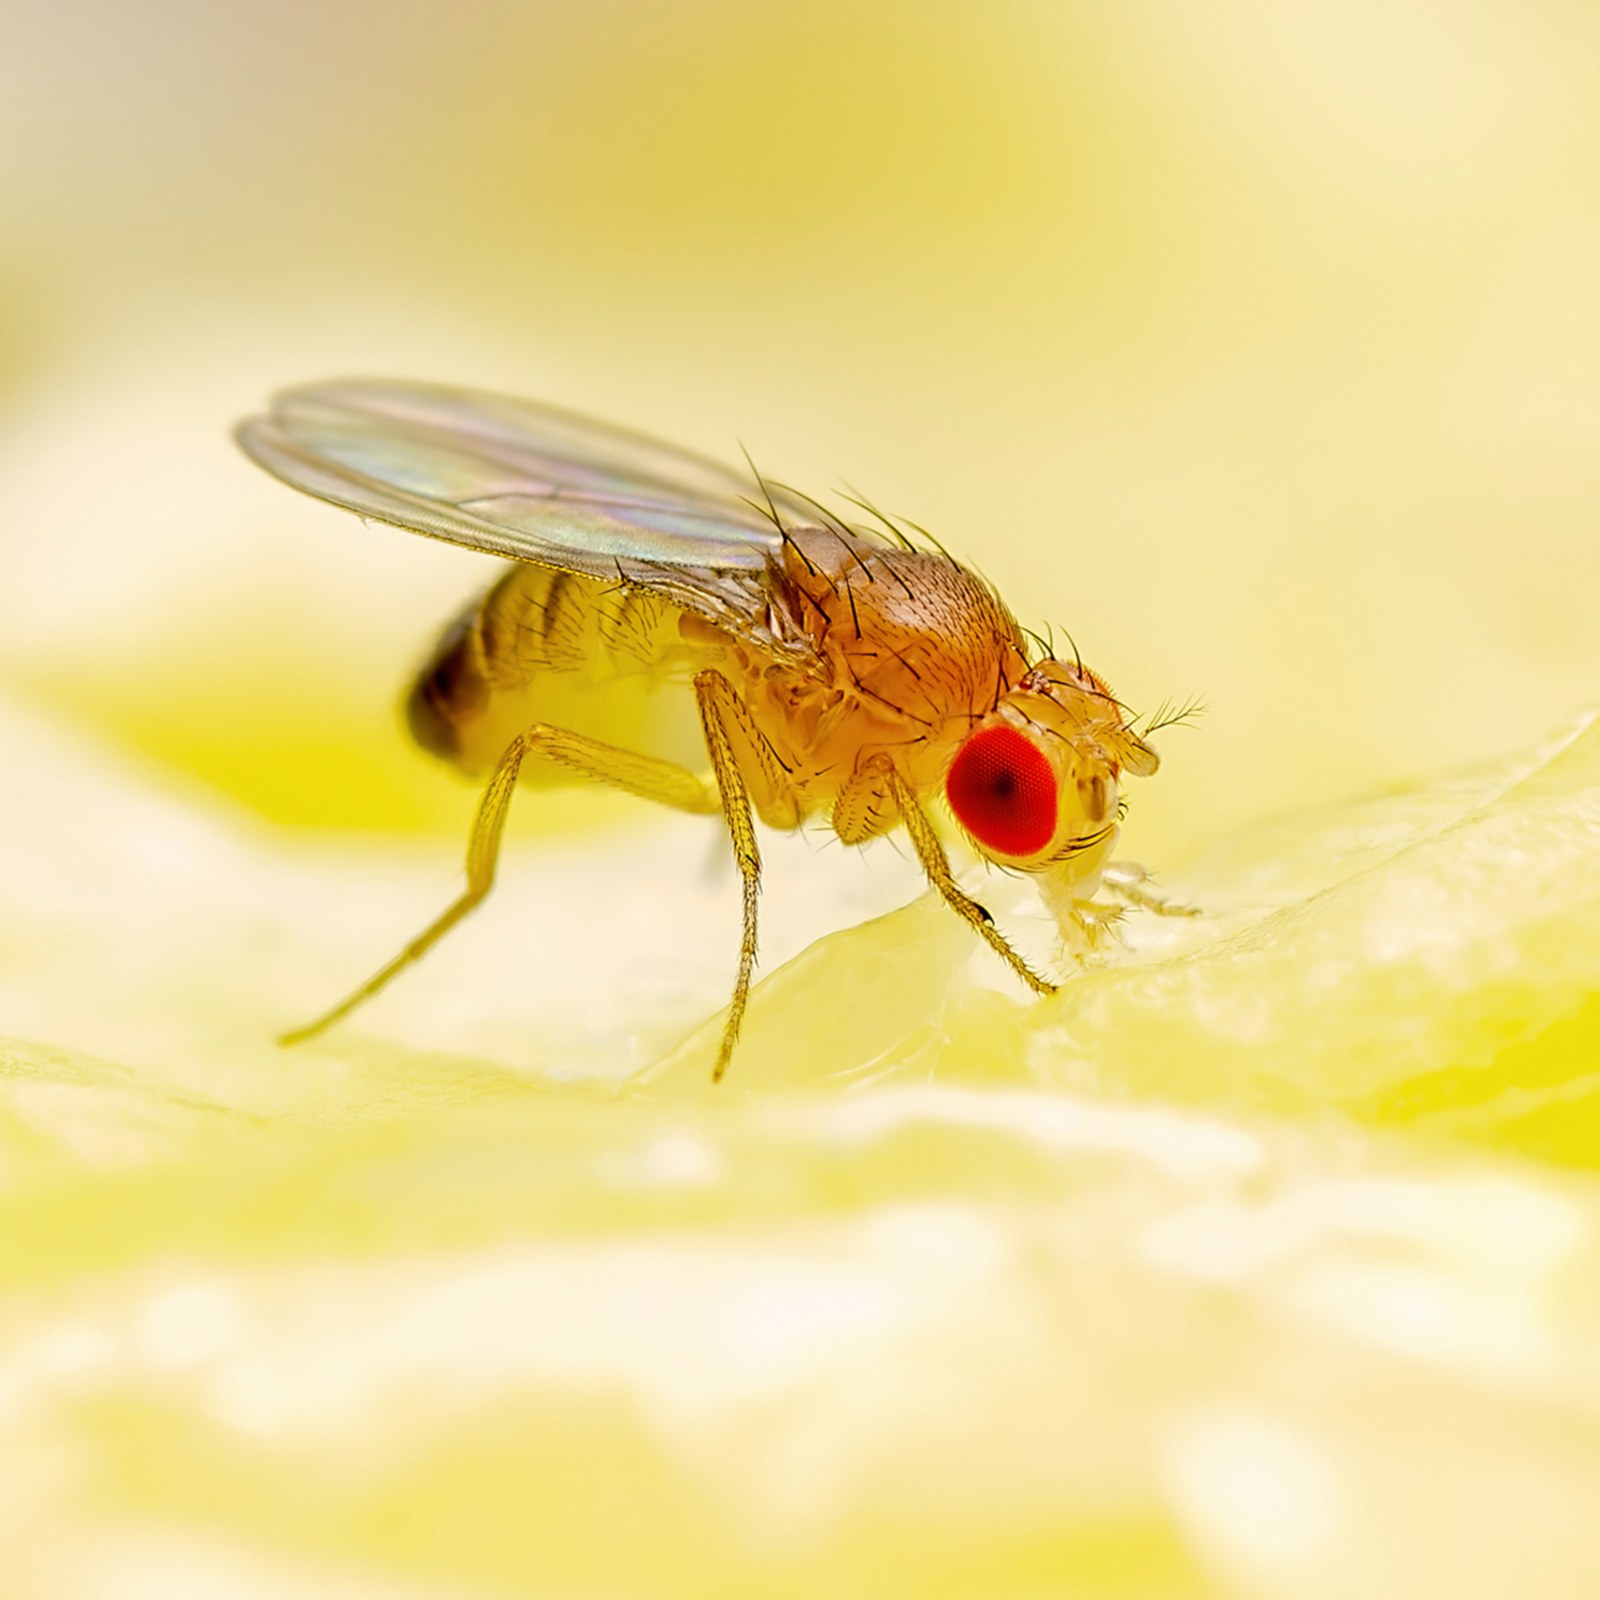 How to Prevent Fruit Fly Invasions